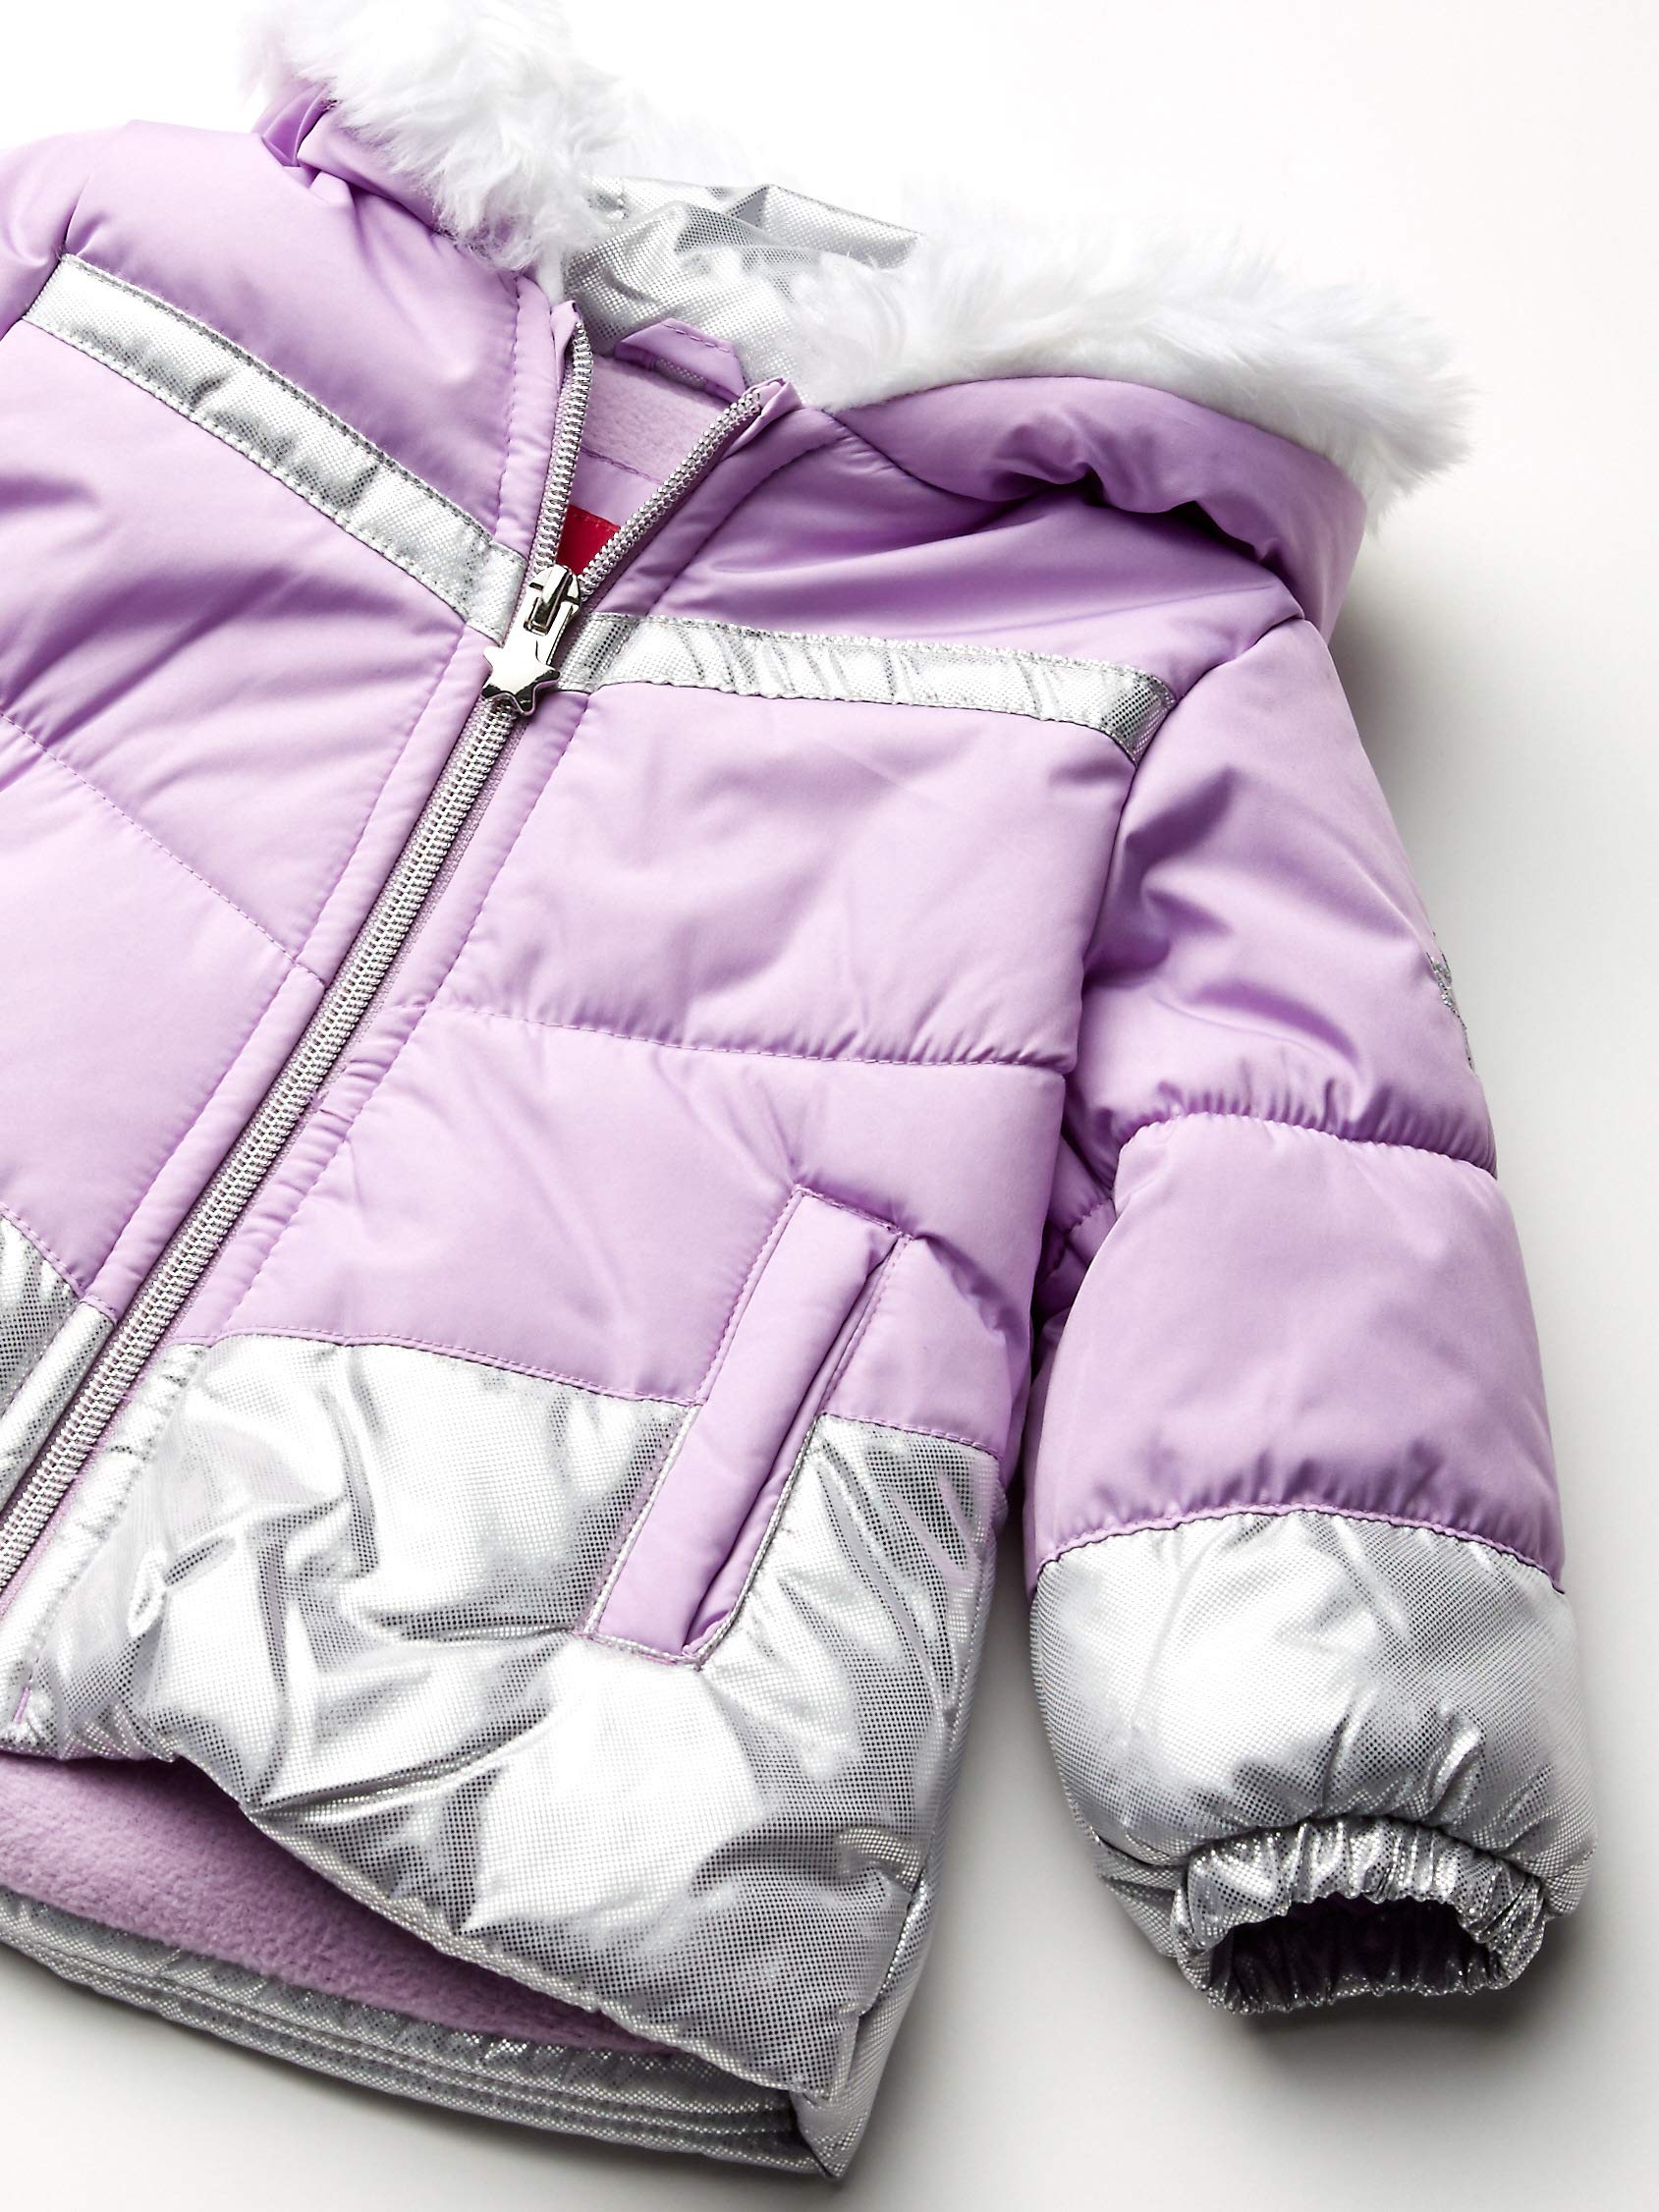 LONDON FOG girls Snowsuit With Snowbib and Puffer Jacket